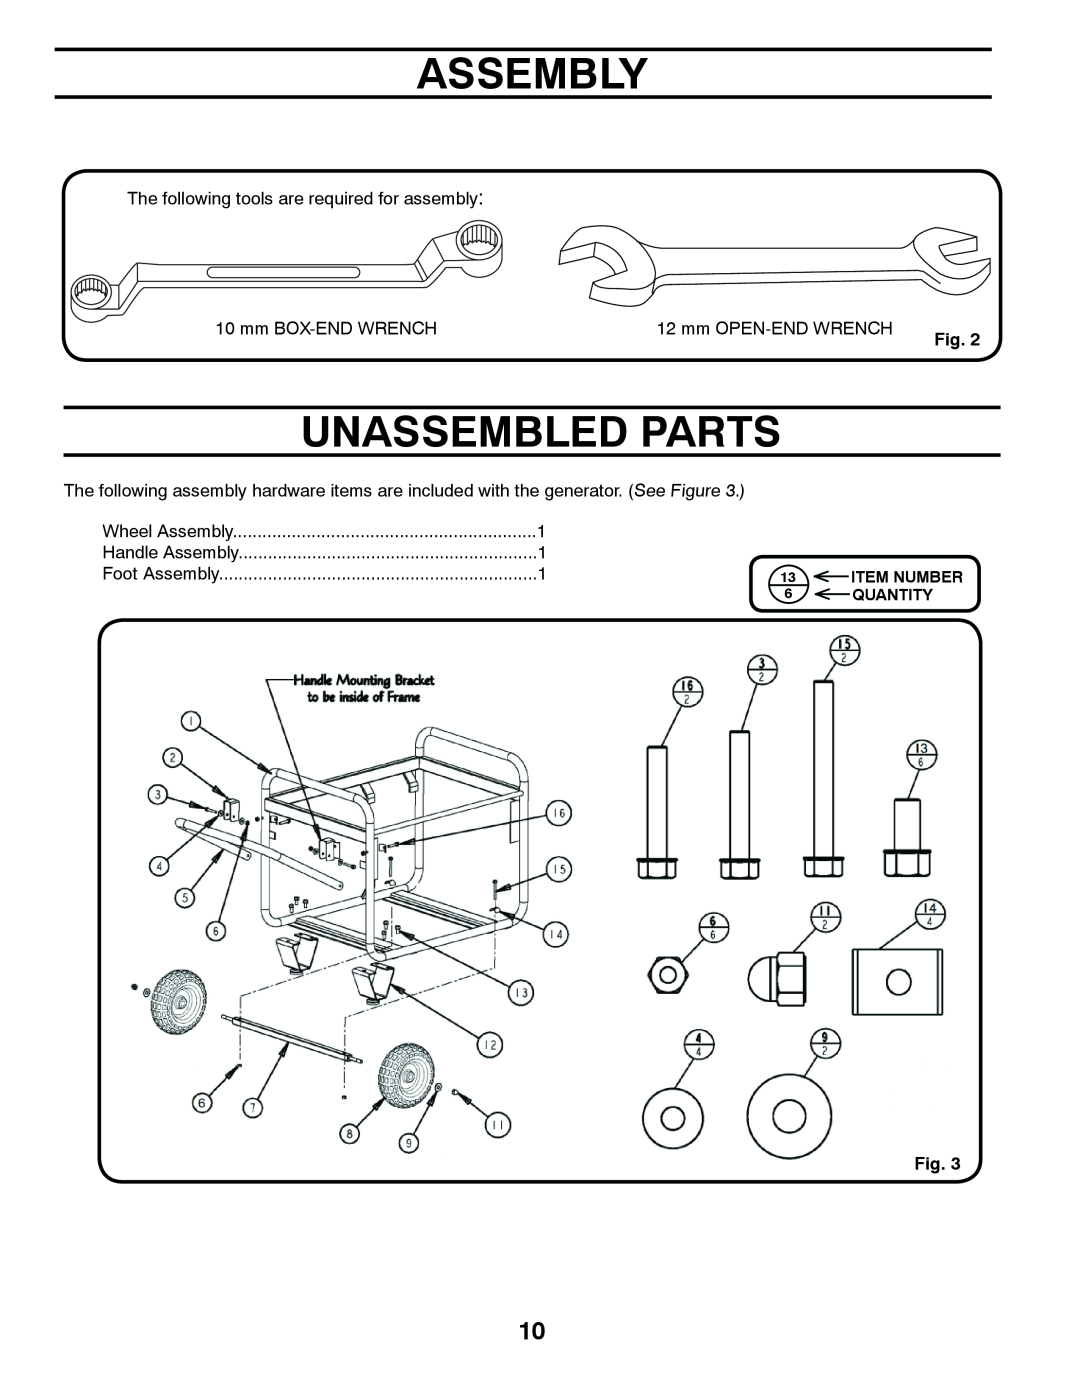 Poulan 420077 owner manual Unassembled Parts, Wheel Assembly, Handle Assembly, Foot Assembly 